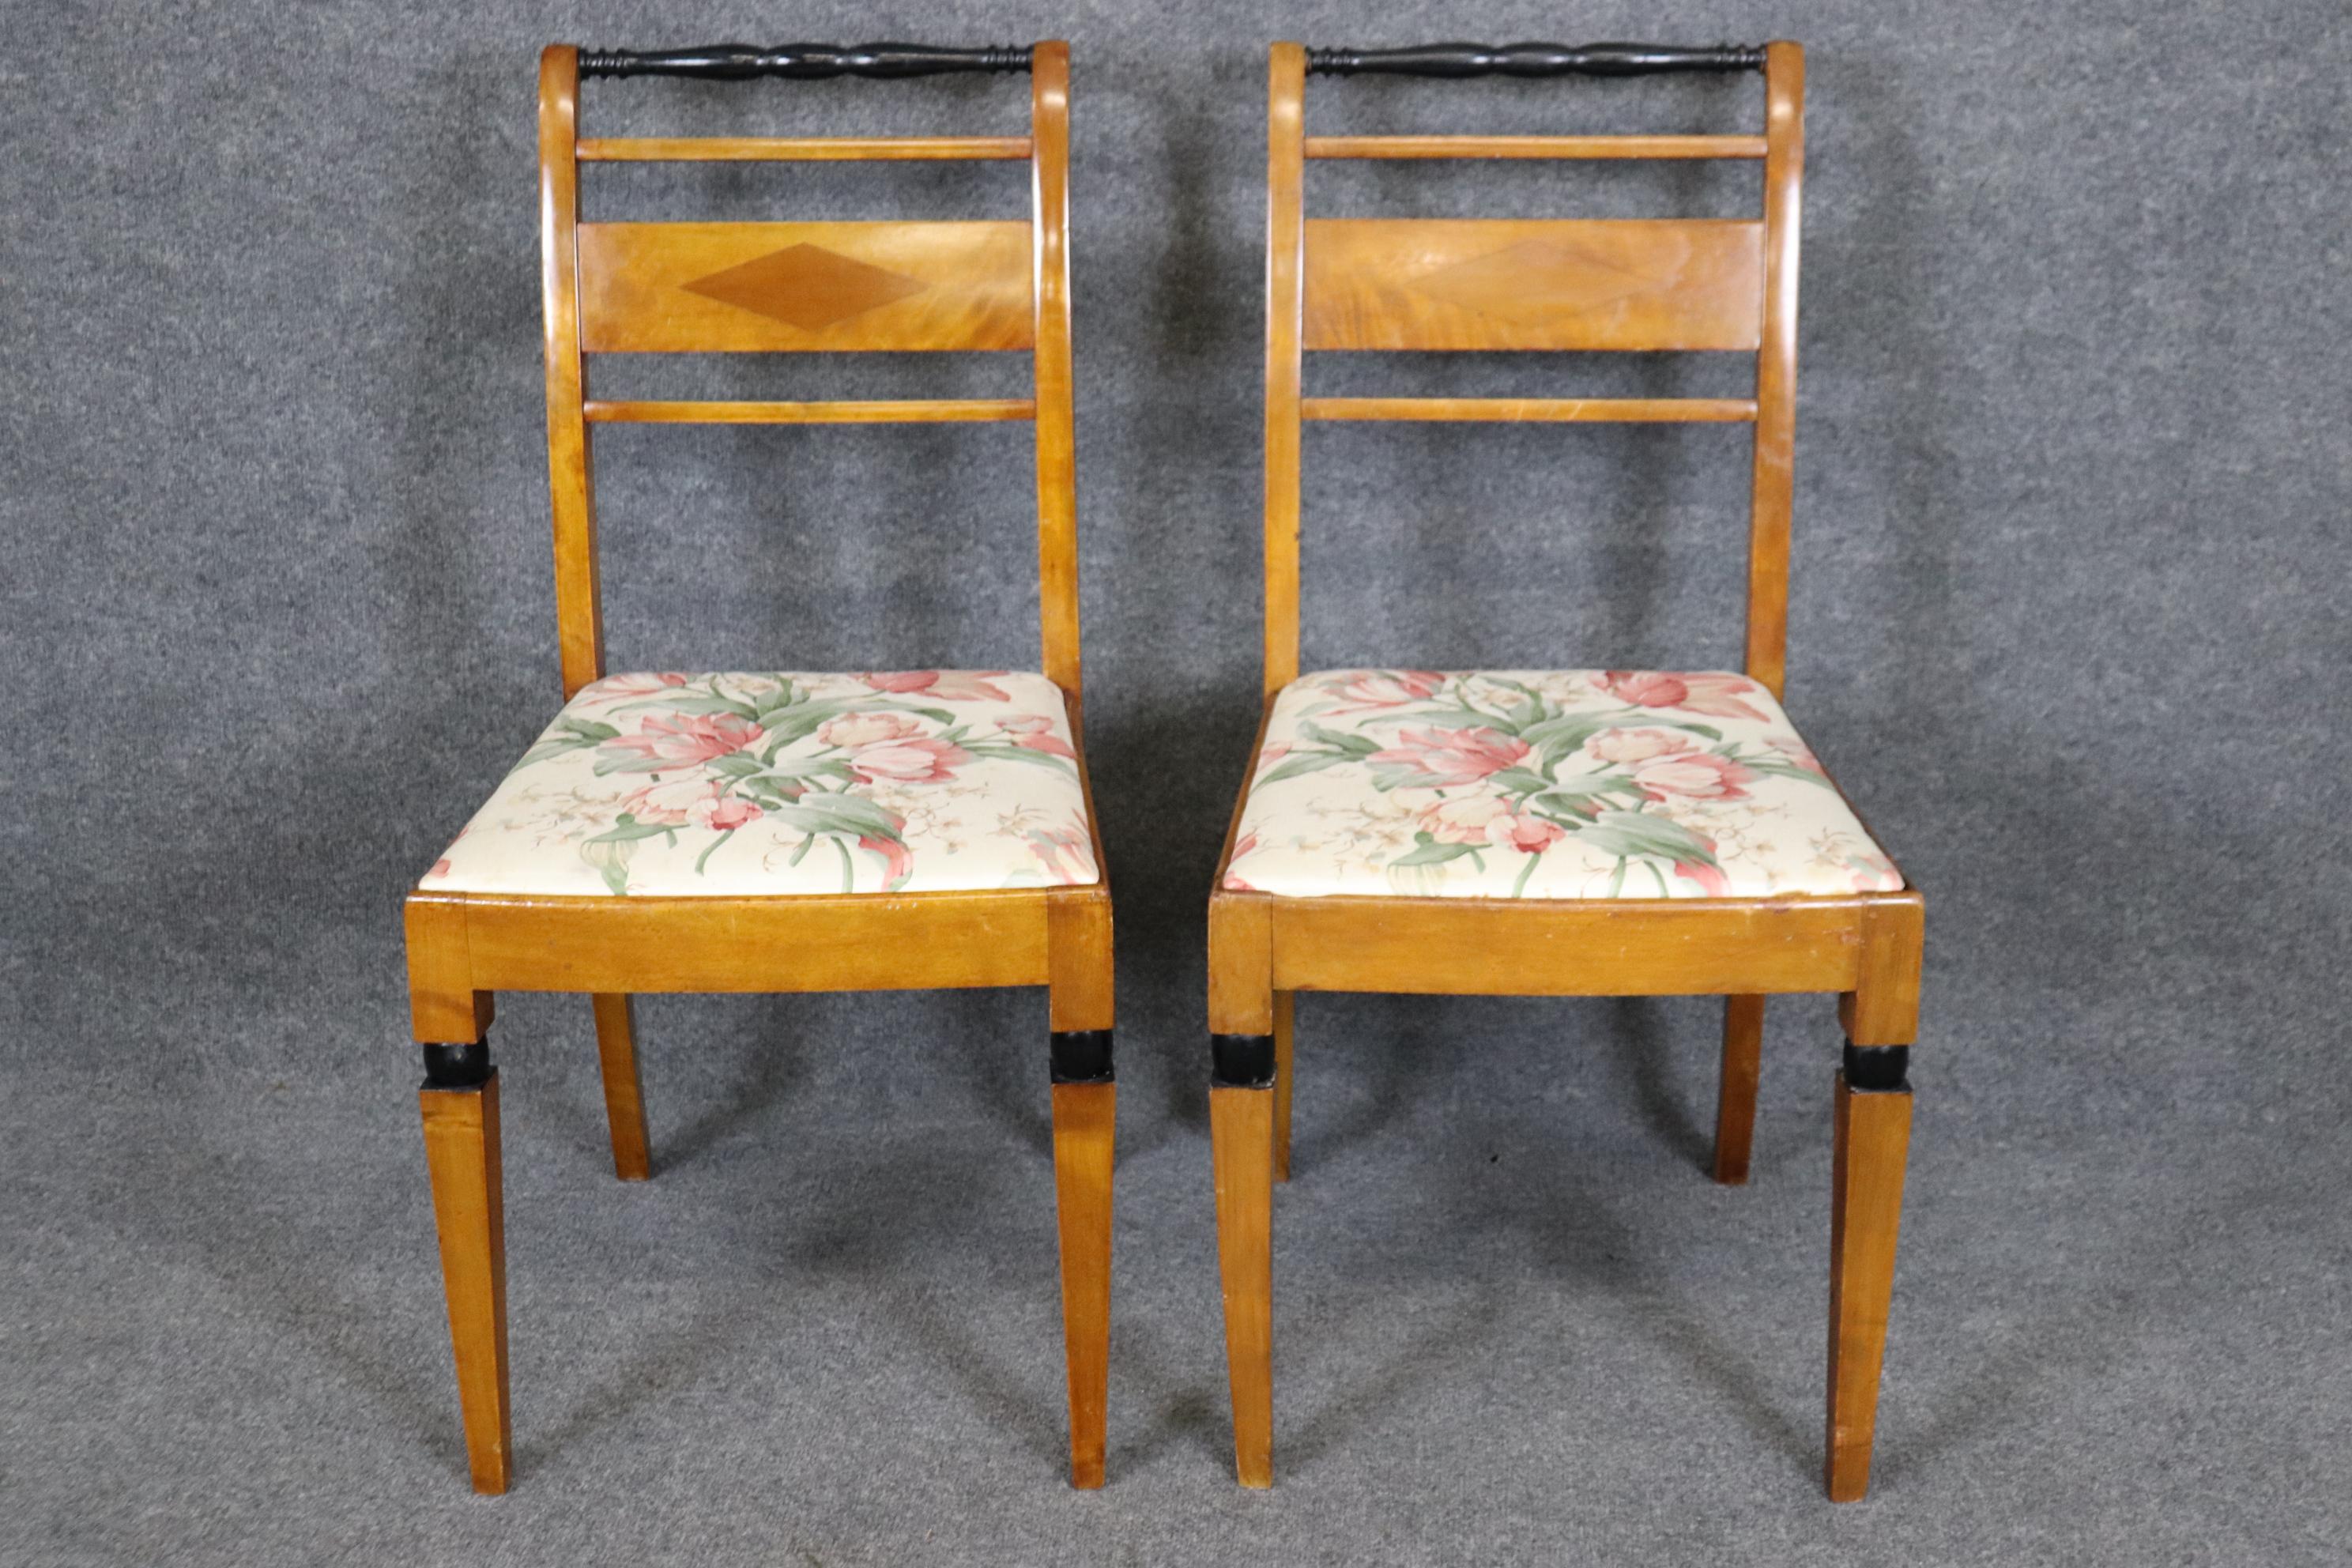 Pair of Birch Antique Biedermeier Style Side chairs with Ebonized Accents In Good Condition For Sale In Swedesboro, NJ